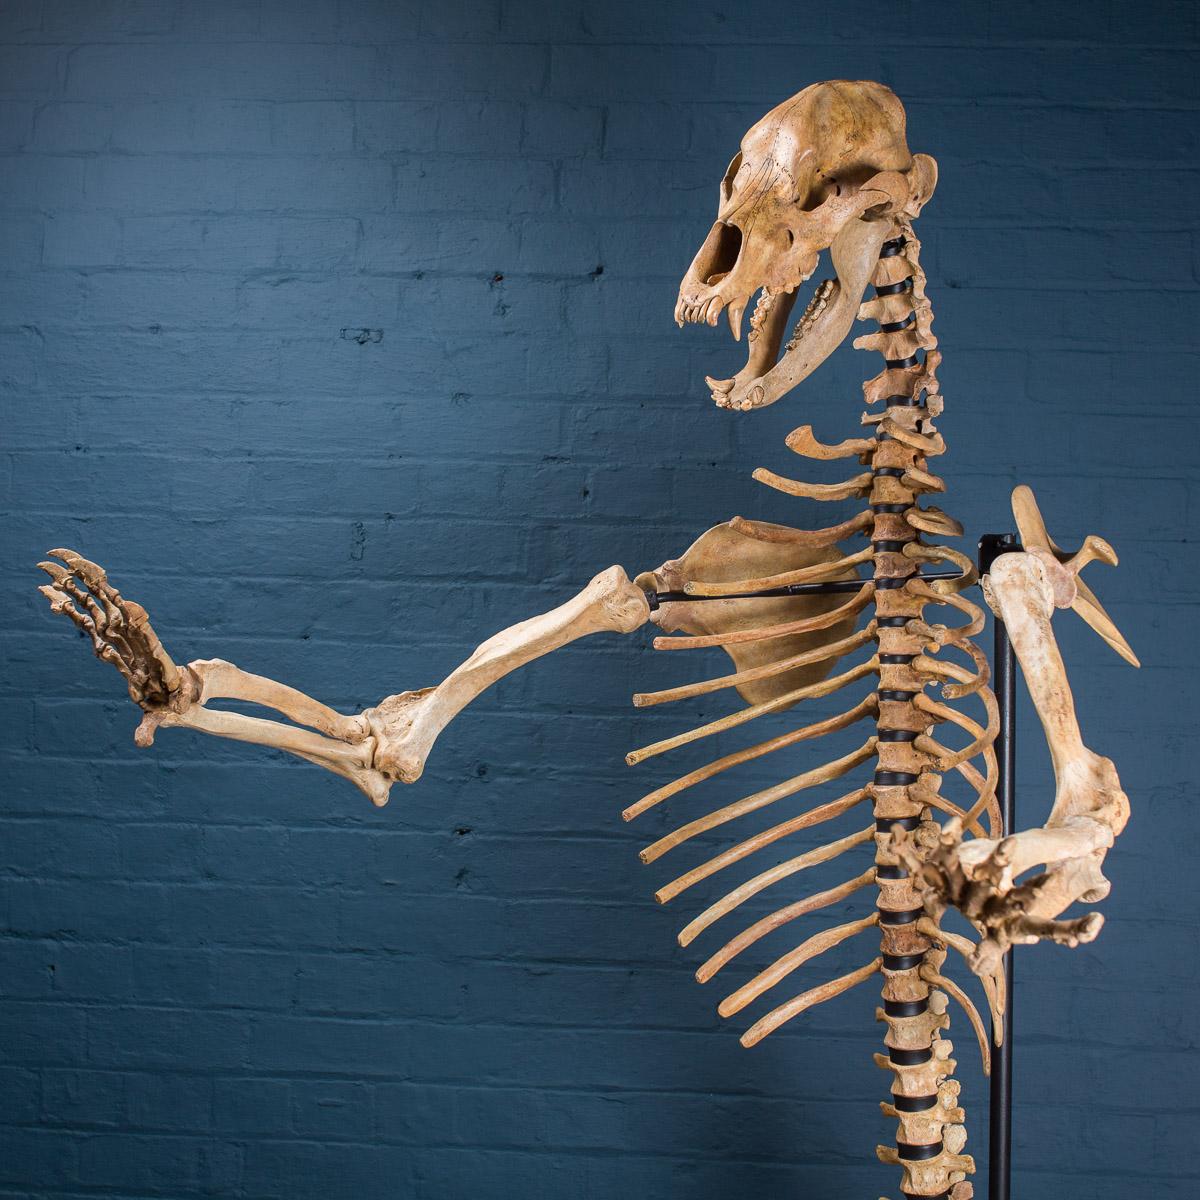 * * *Our company policy is not to ship any taxidermy items to the USA. We apologise from any inconvenience this may cause. * * *

A large cave bear skeleton (Ursus Spelaeus) from the Carpathian Mountains (Romania) dating back to the Upper